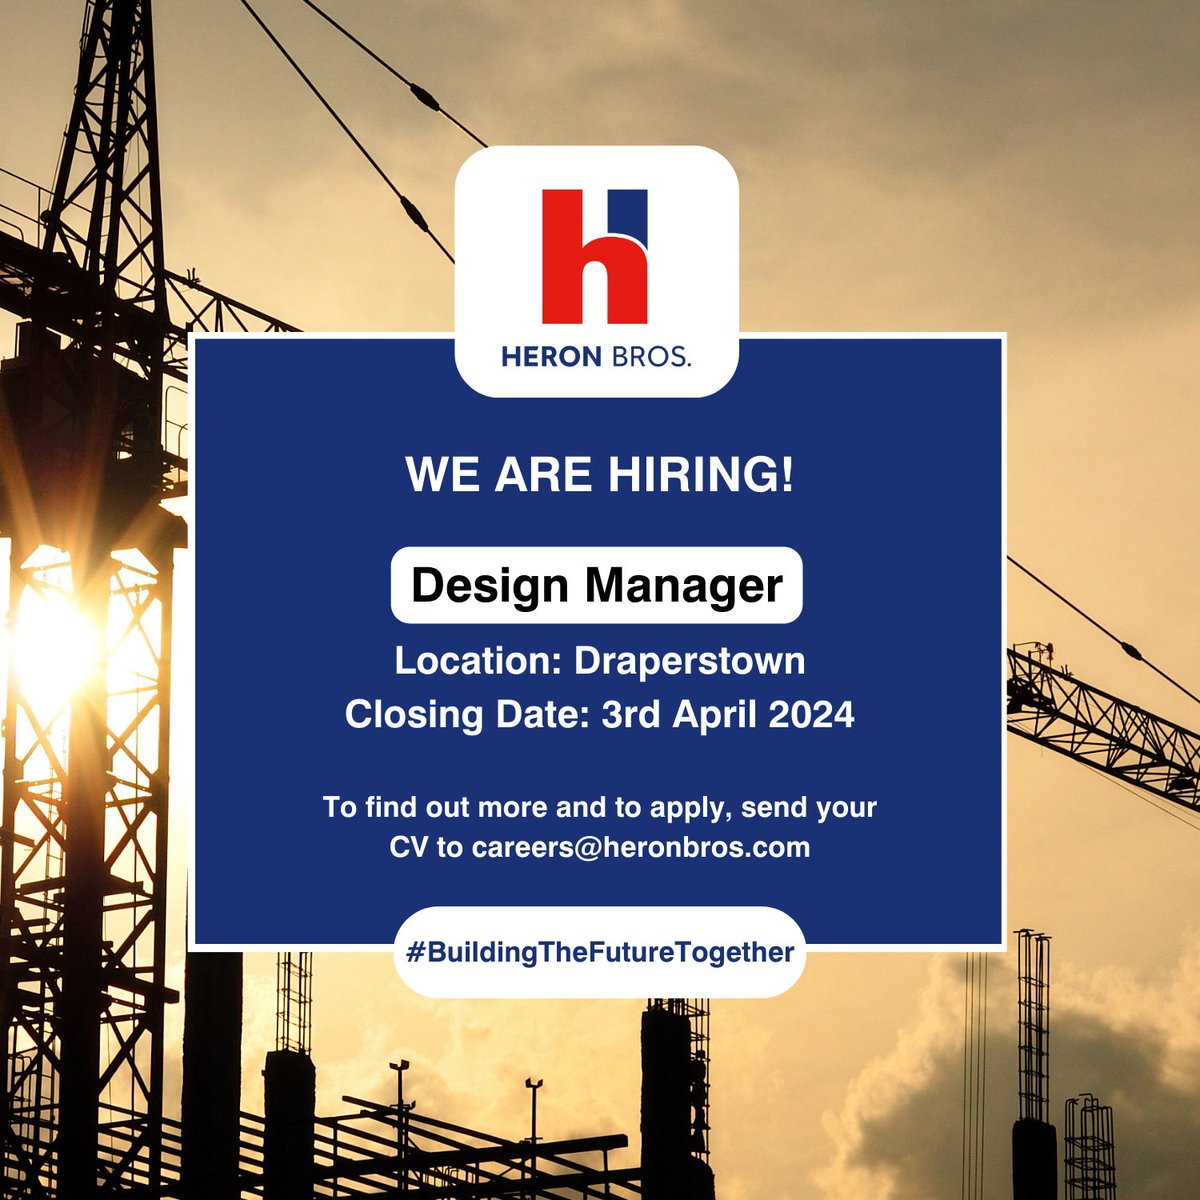 We're Hiring! 👇 Do you know anyone suitable for our Design Manager role? To find out more and to apply, send your CV to careers@heronbros.com. DEADLINE: 3rd April 2024 #wearehiring #constructionni #hiringnorthernireland